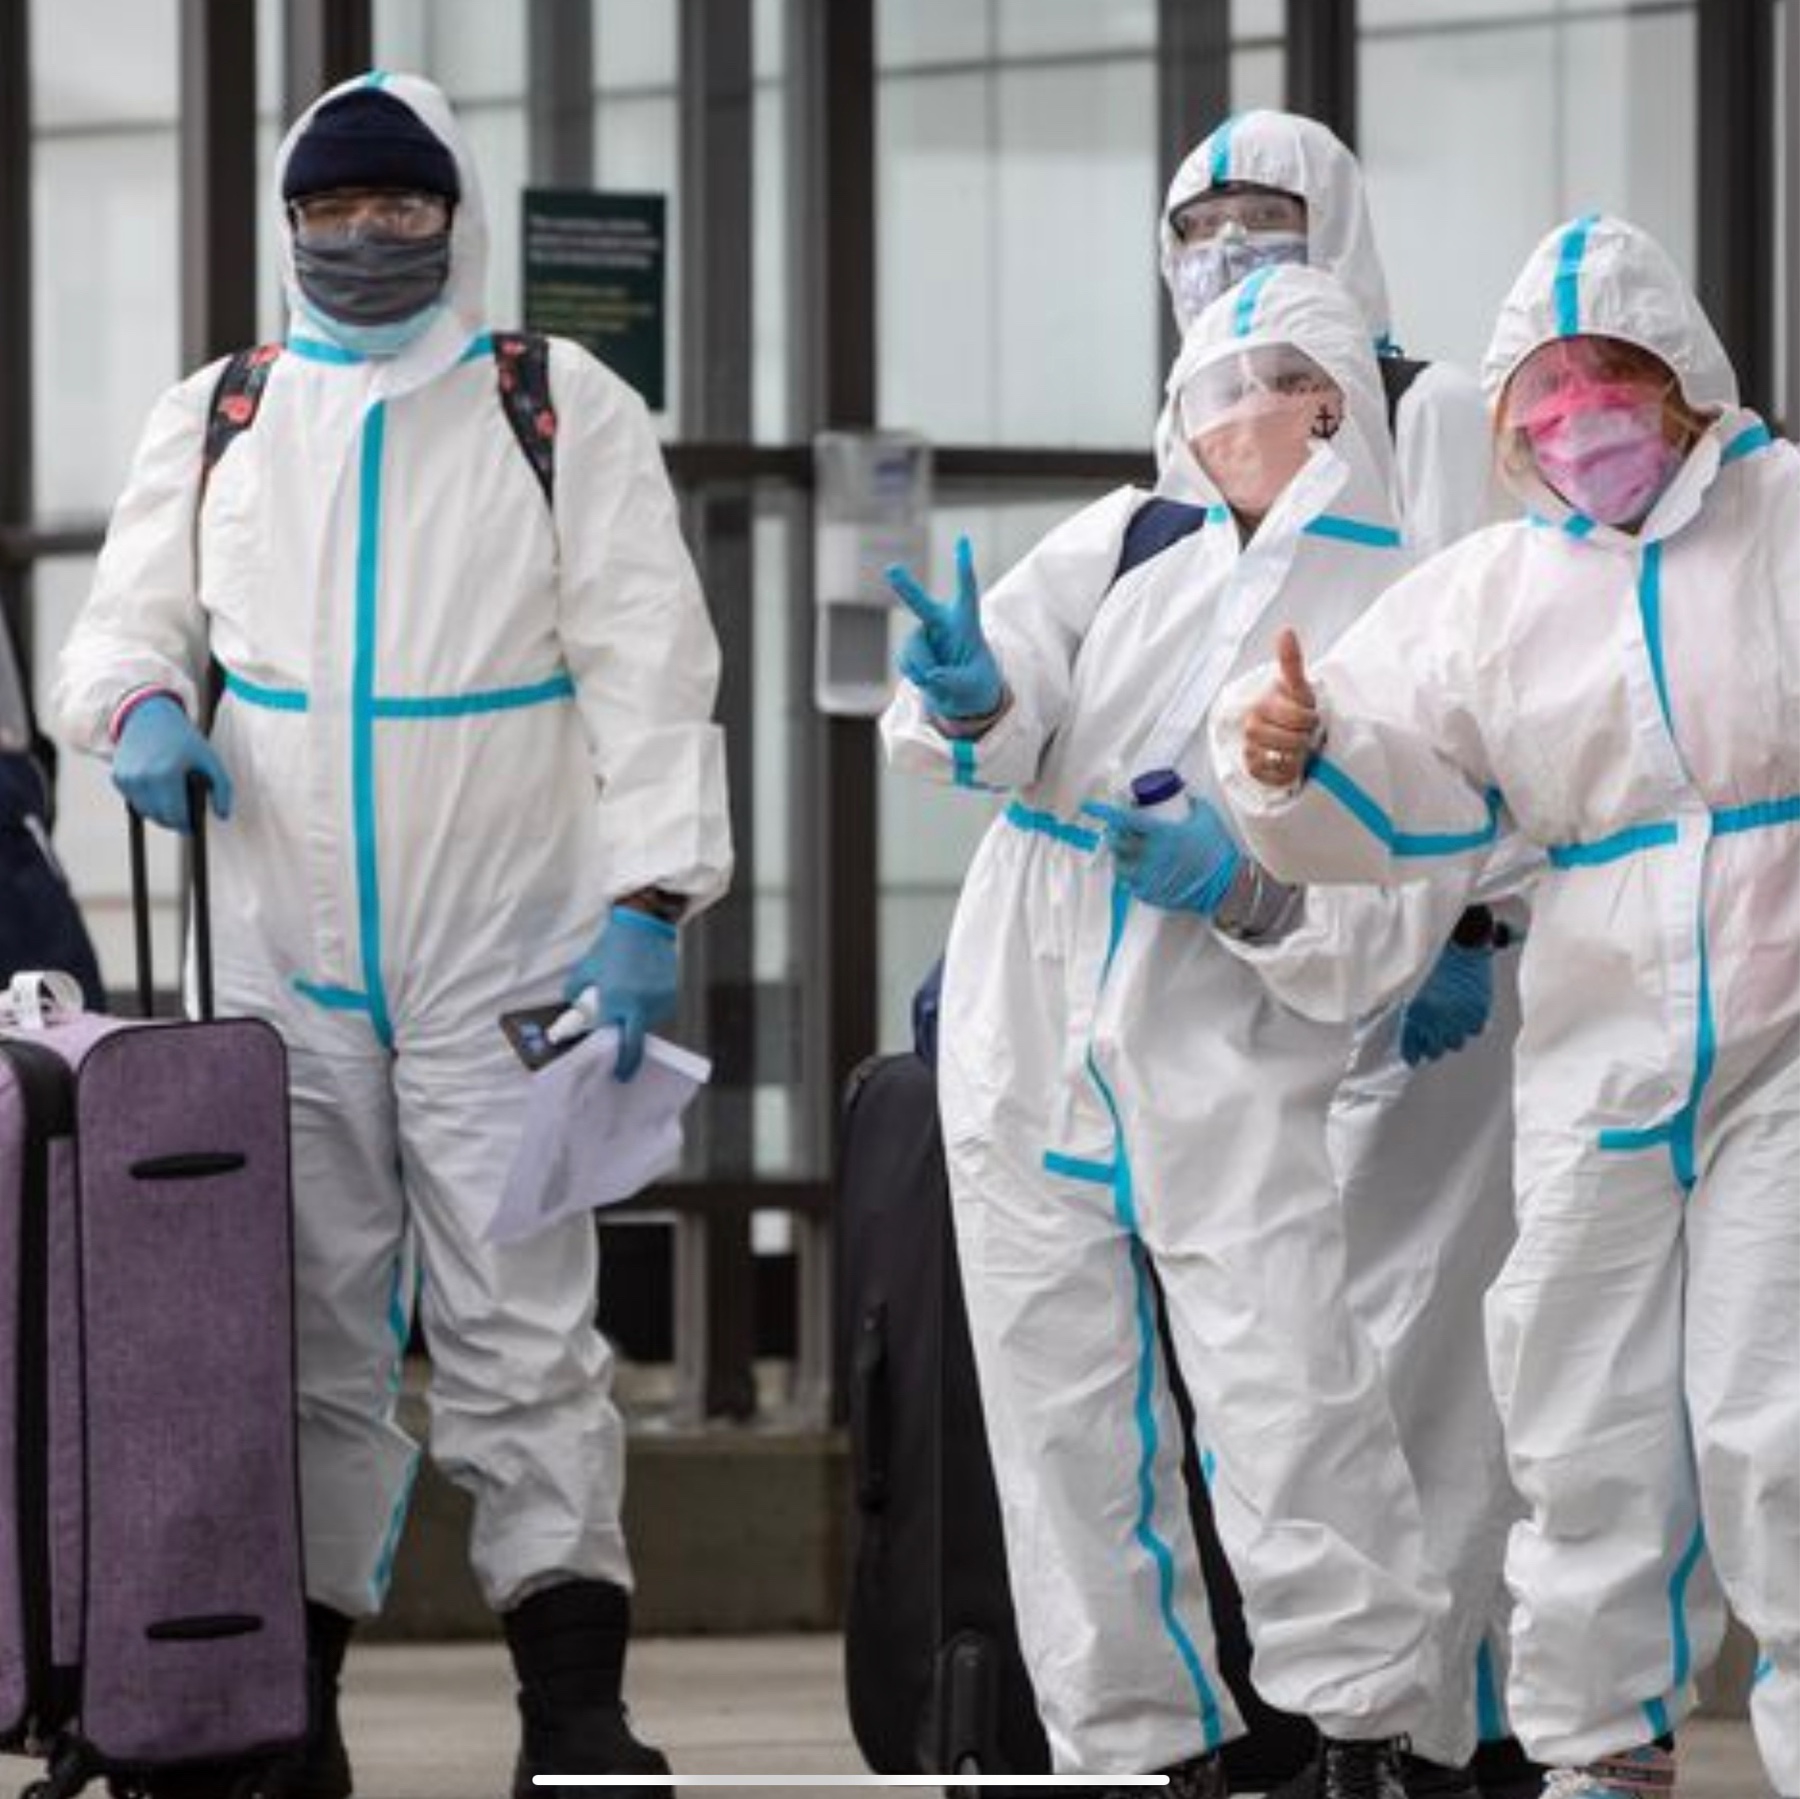 4 people standing outside an airport giving thumbs up to the camera. They are dressed head to toe in white coveralls, and wearing safety glasses and face masks